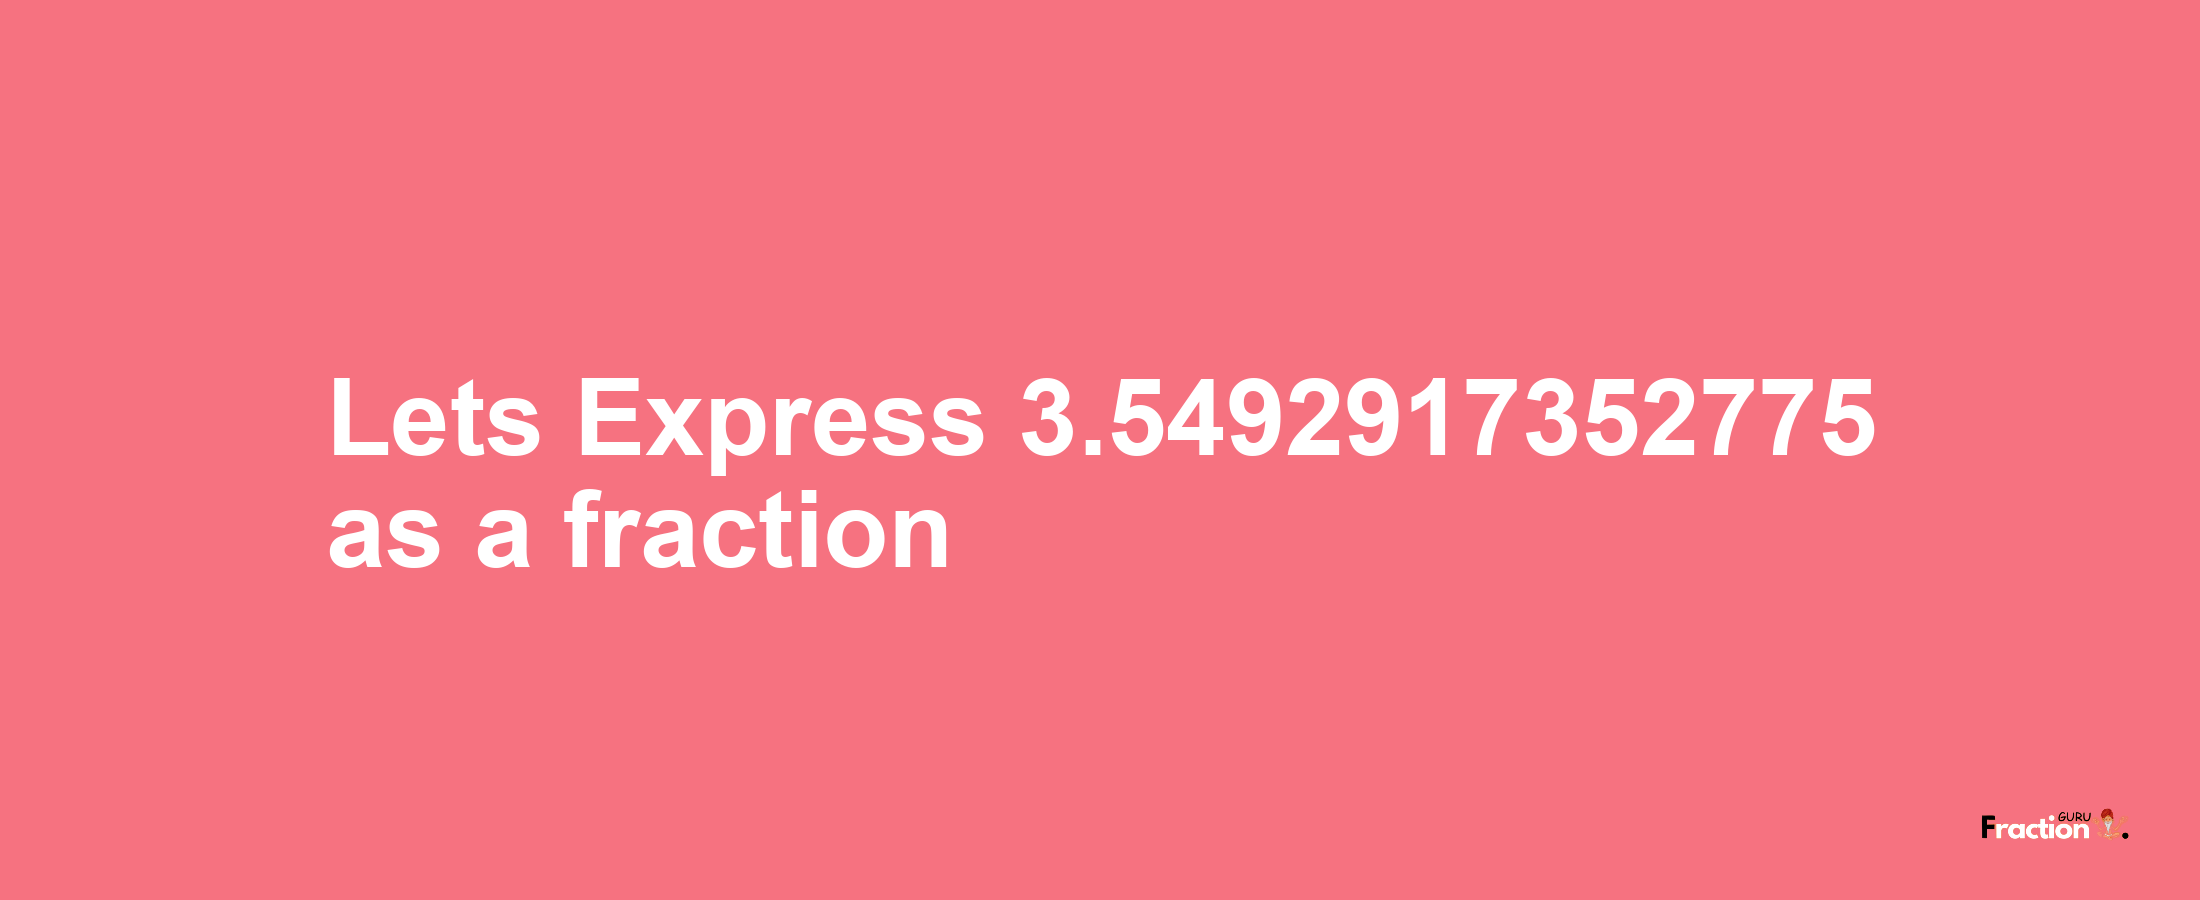 Lets Express 3.5492917352775 as afraction